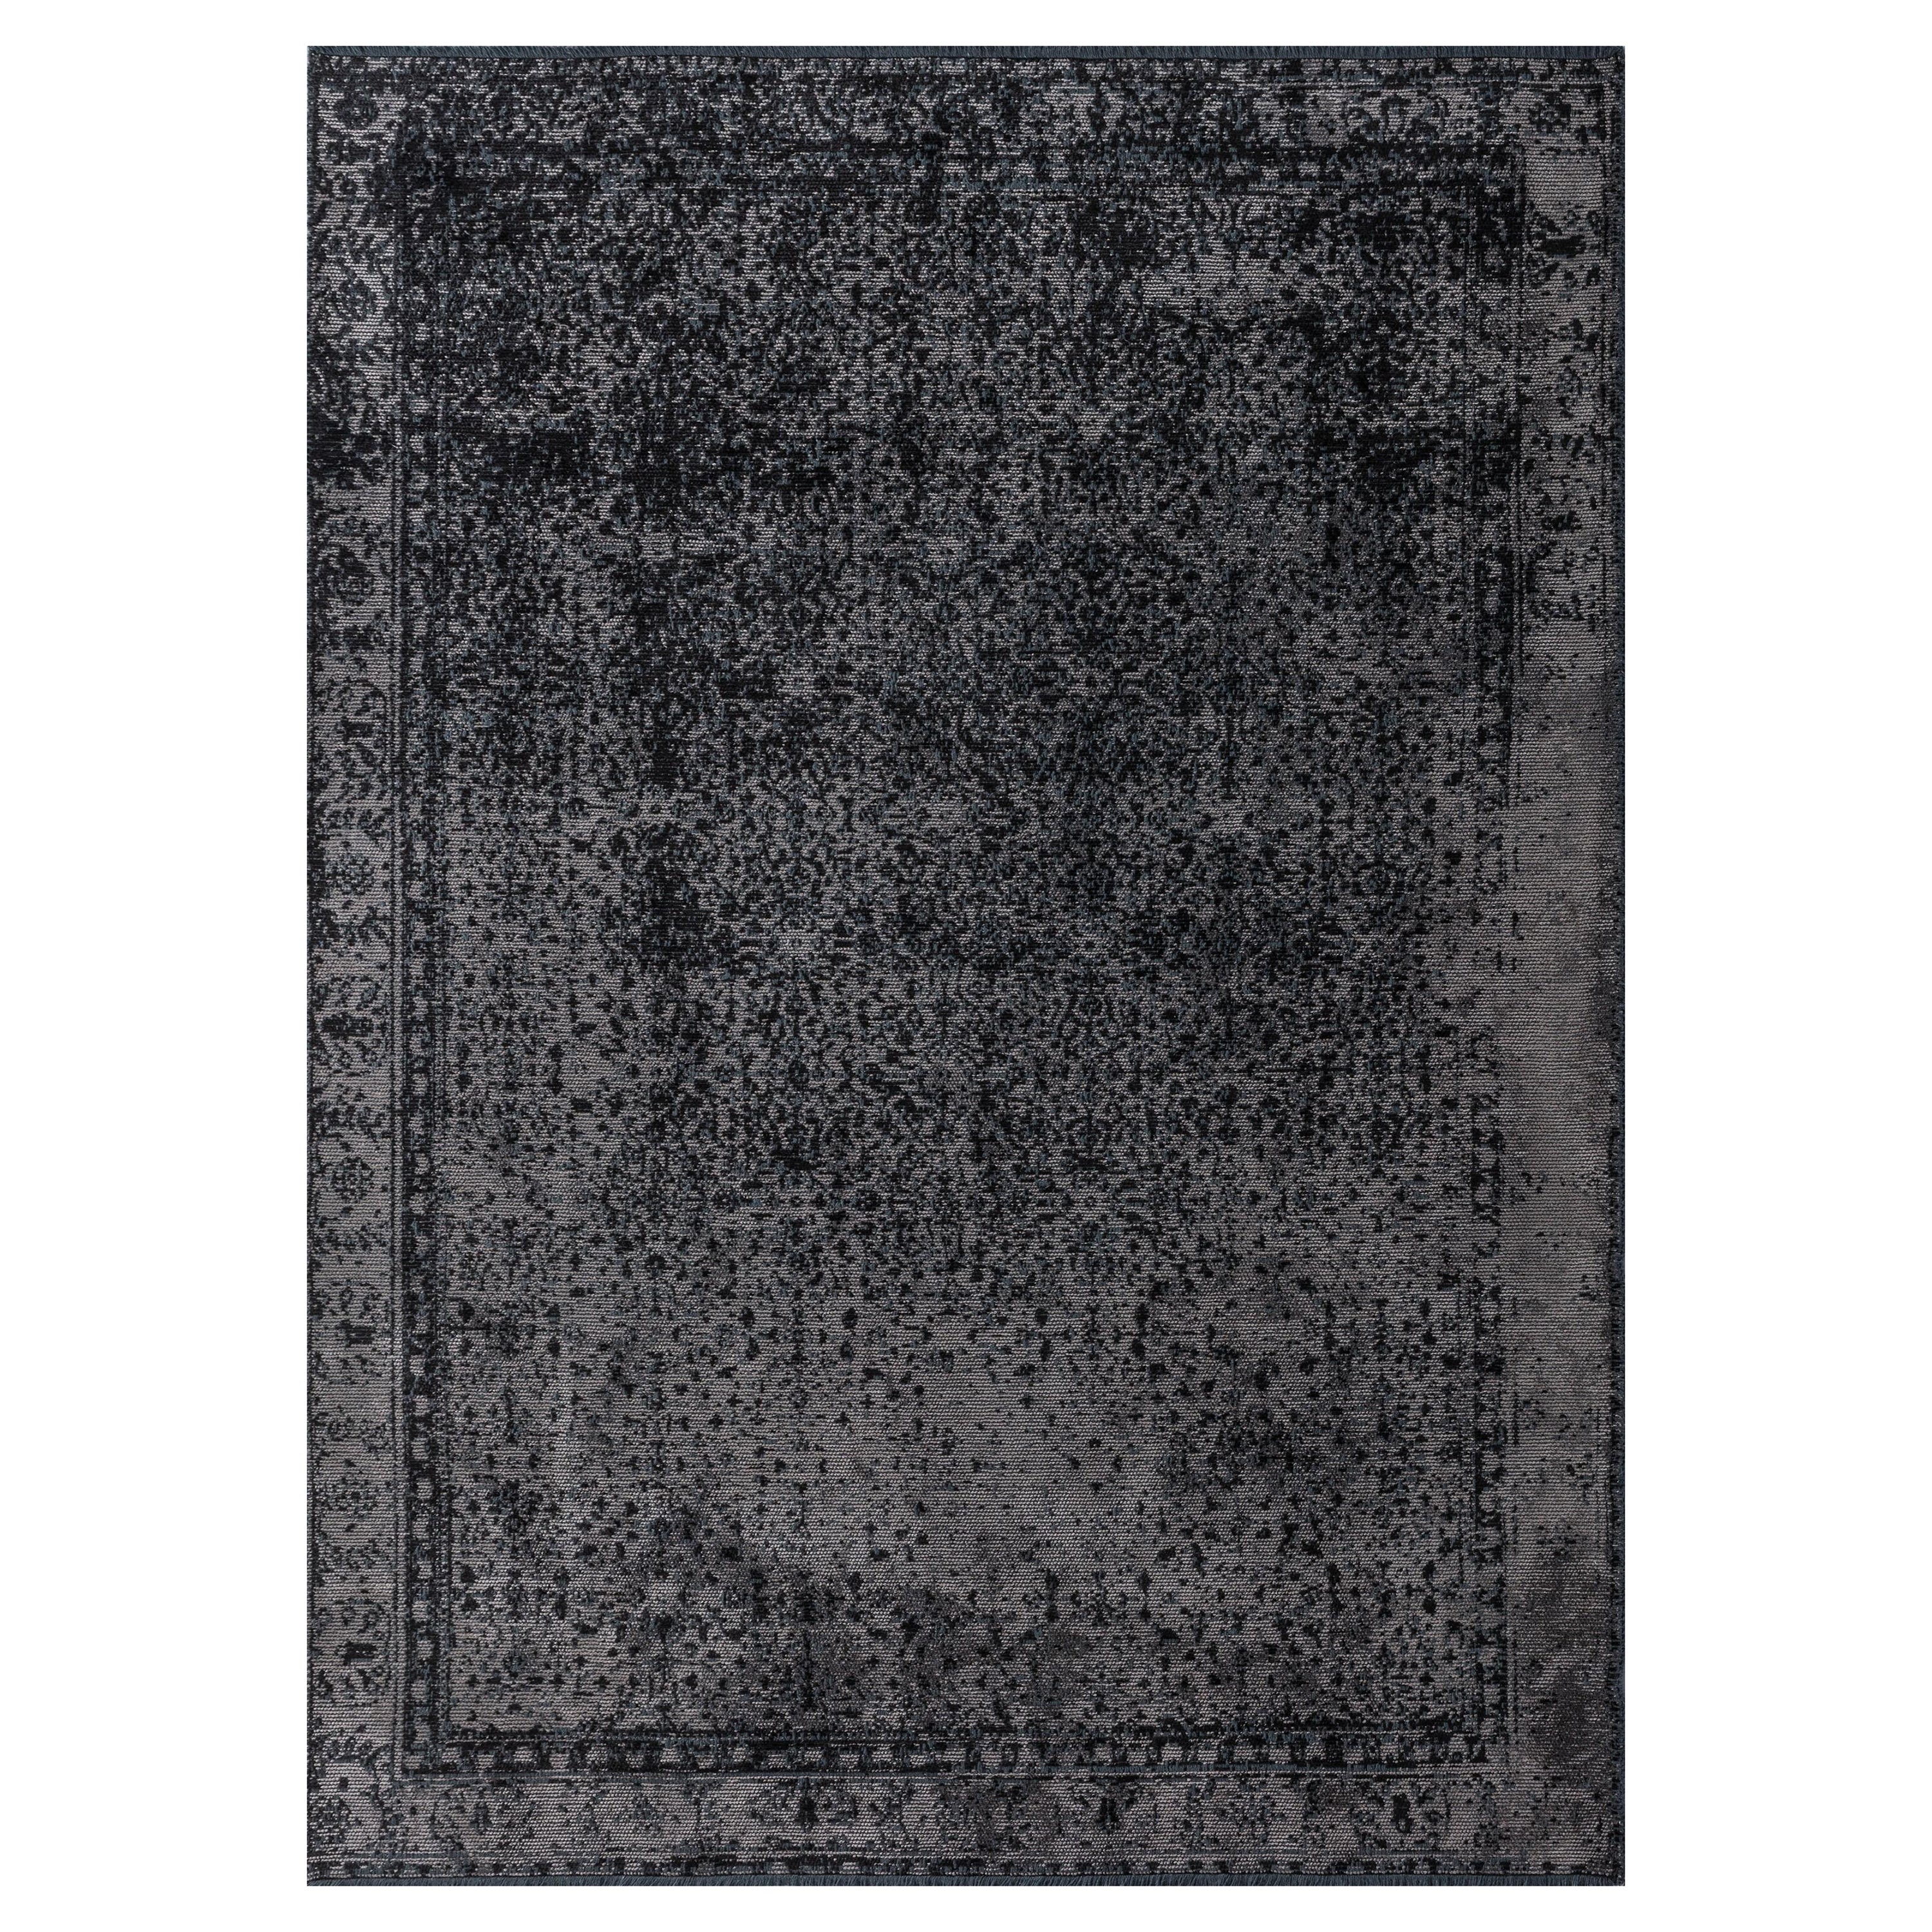 For Sale:  (Gray) Contemporary Damask Luxury Area Rug